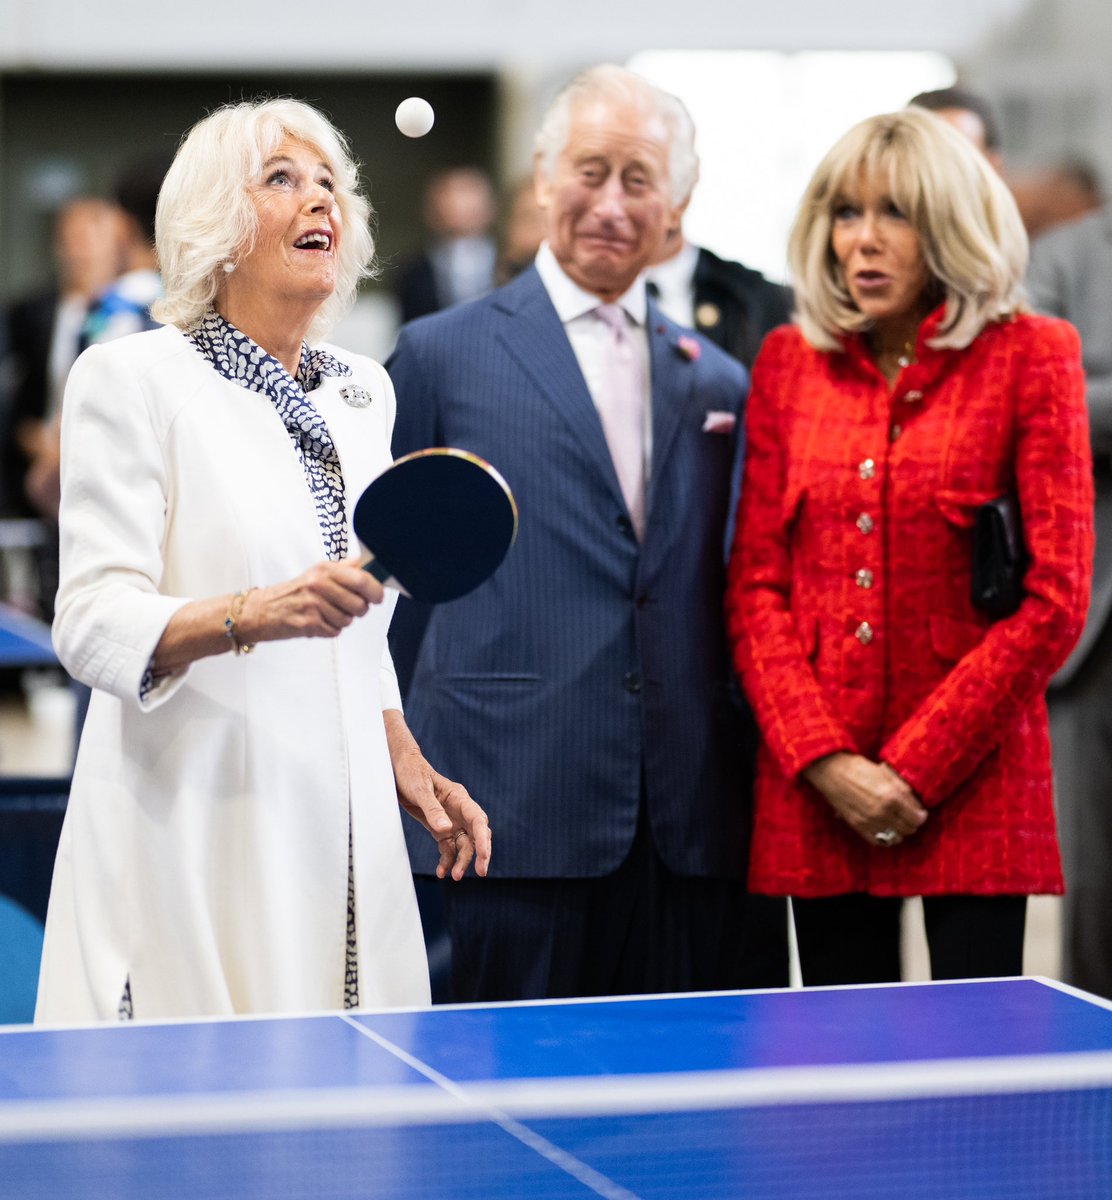 Who knew Queen Camilla was such a dab hand at table tennis? King Charles & Brigitte Macron certainly seemed impressed during a trip to Saint Denis in Paris. #RoyalVisitFrance